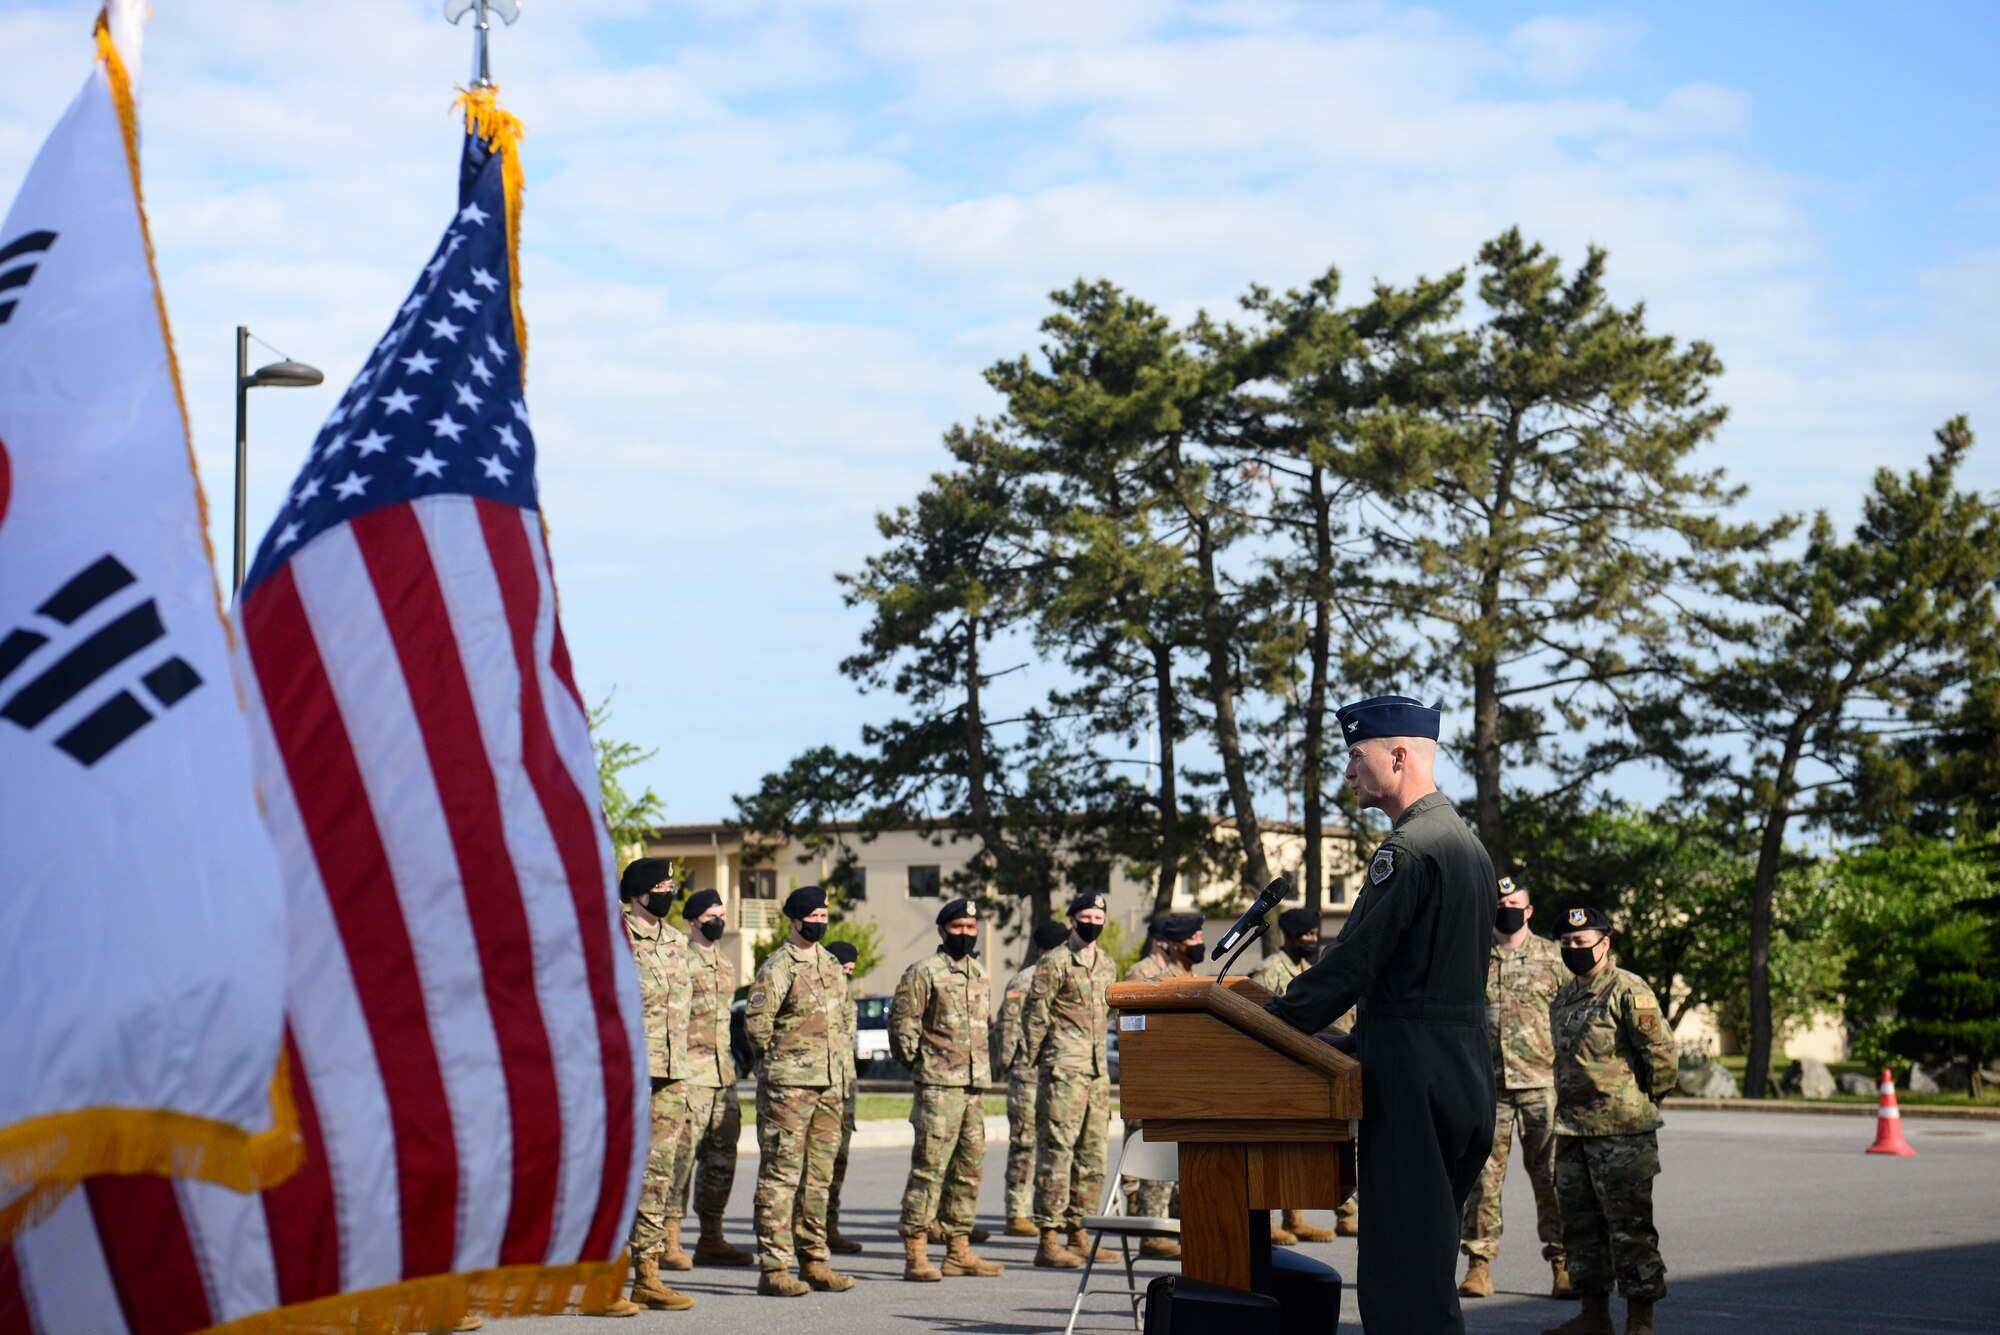 A commander speaks during a ceremony.